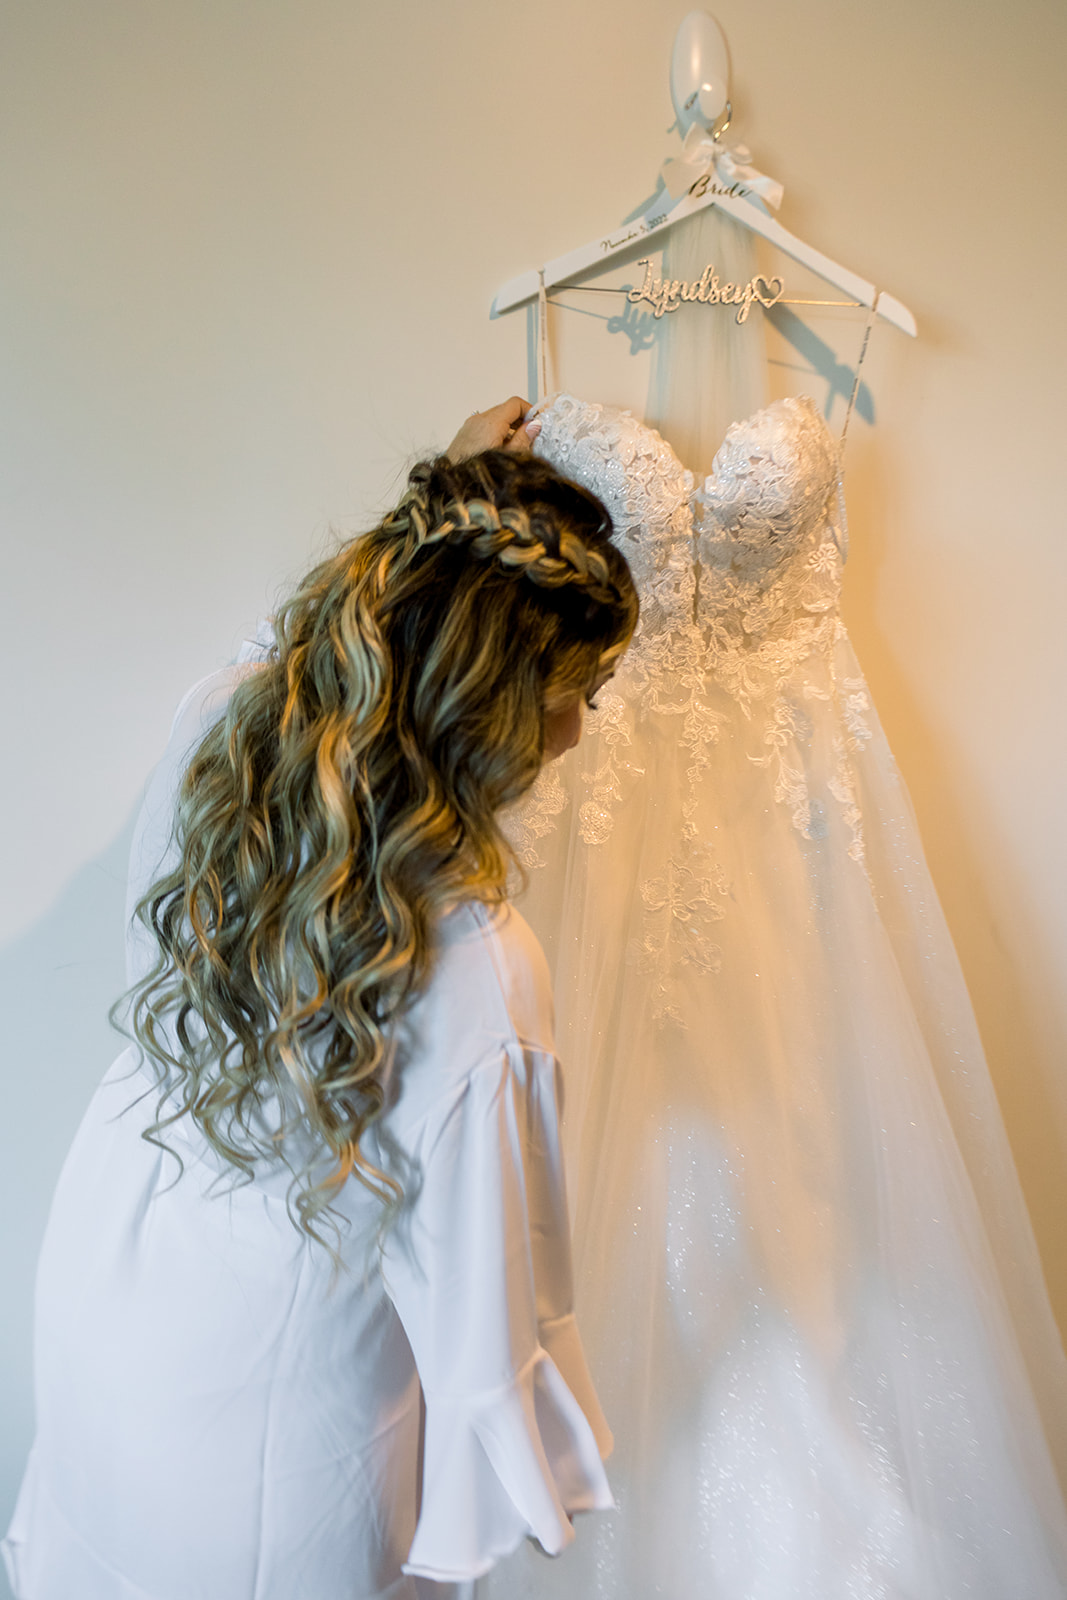 Bride before she puts on her wedding dress